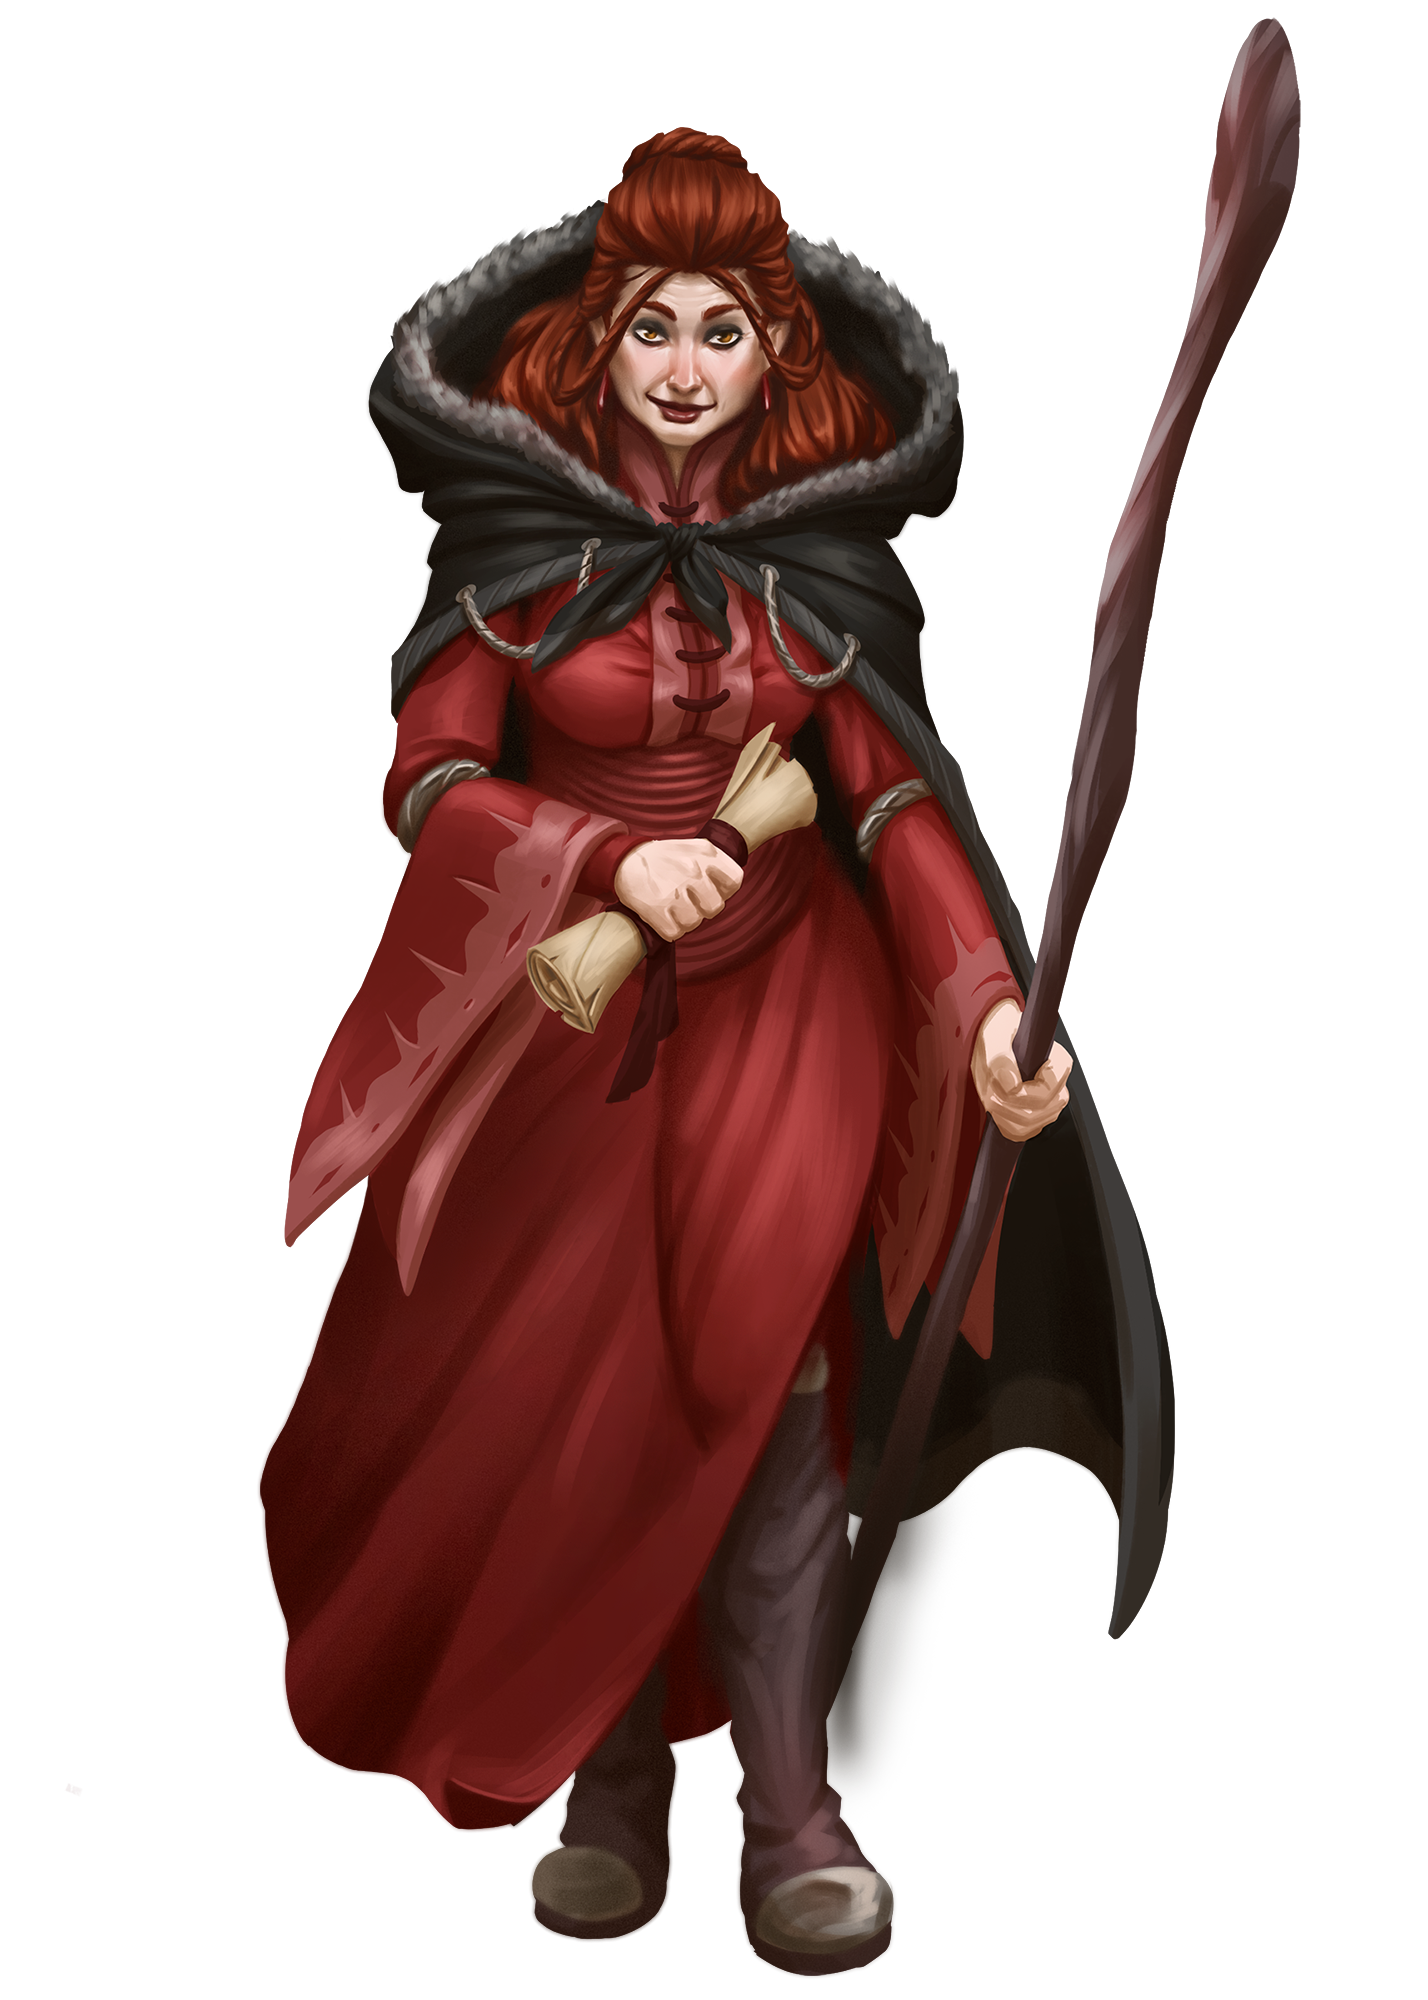 A red-haired woman with a hooded cloak, carrying a walking staff and a scroll